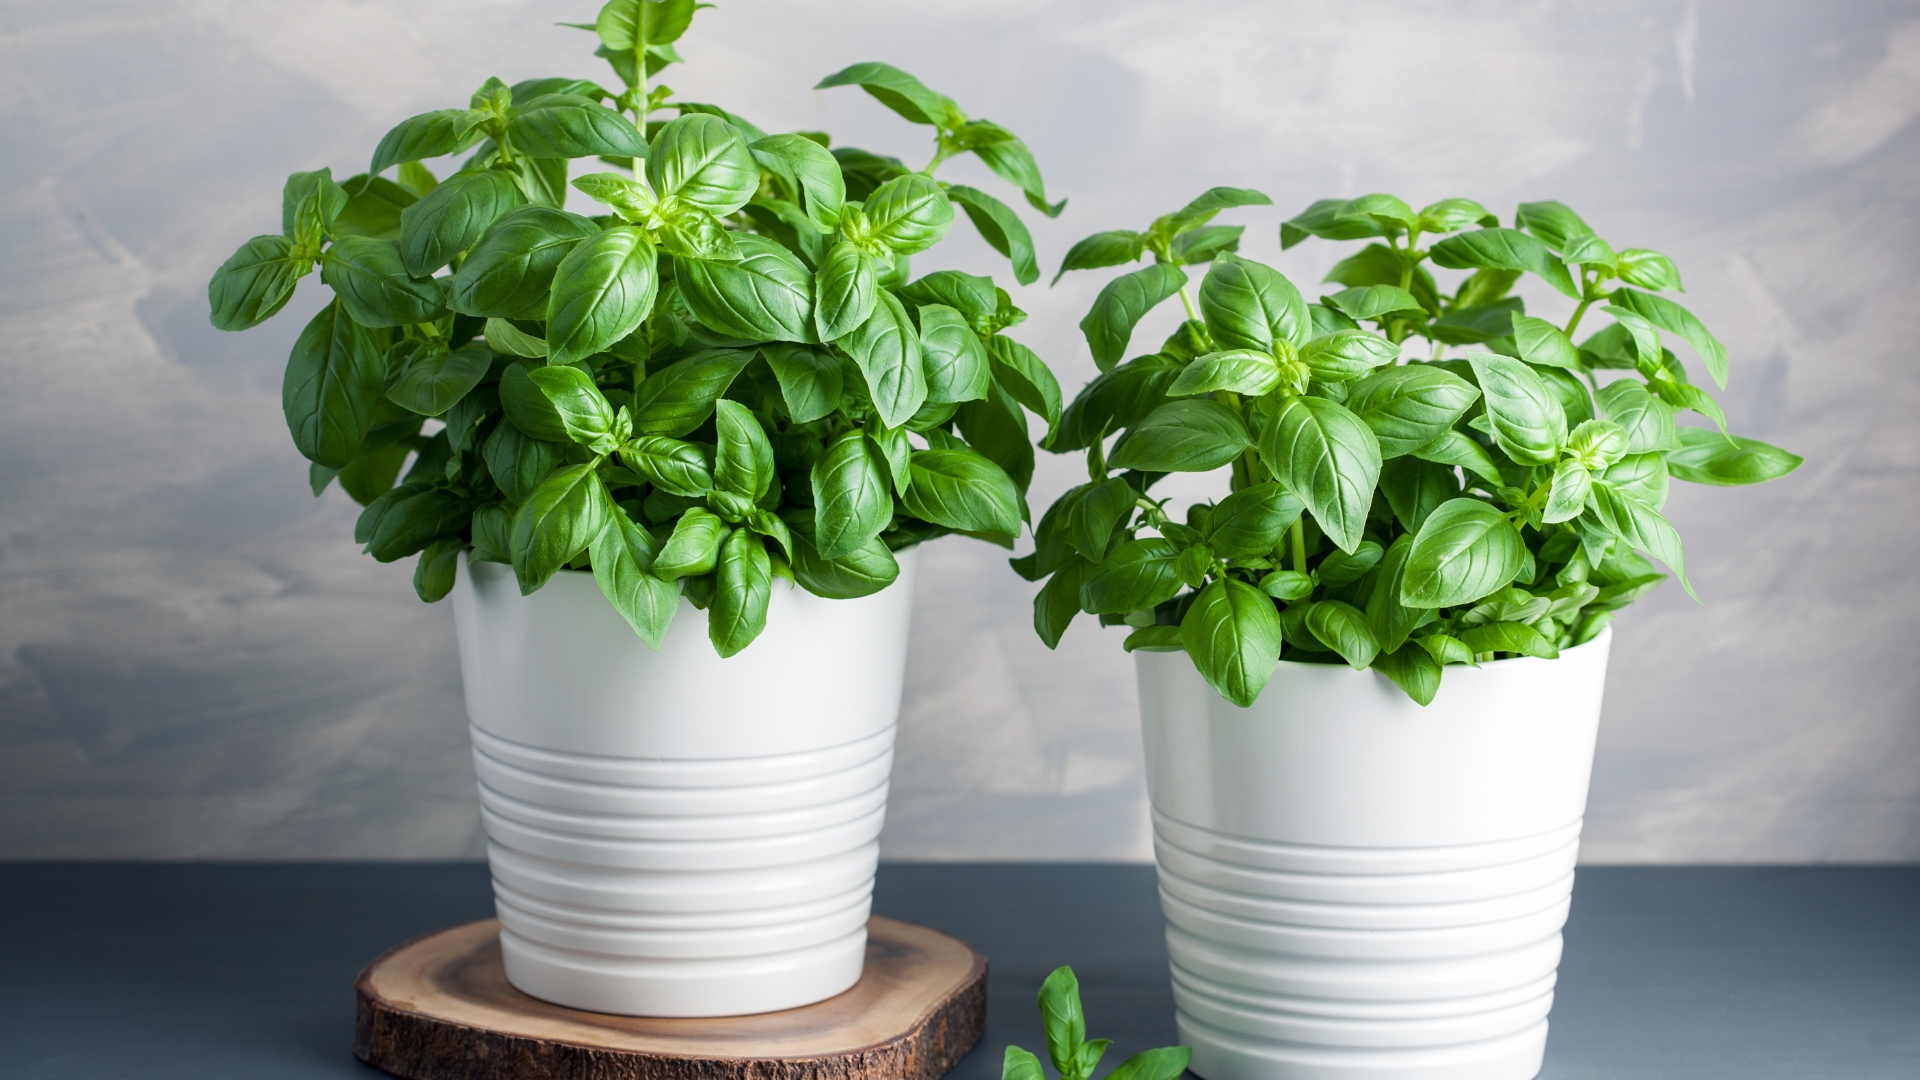 basil growing in white pots